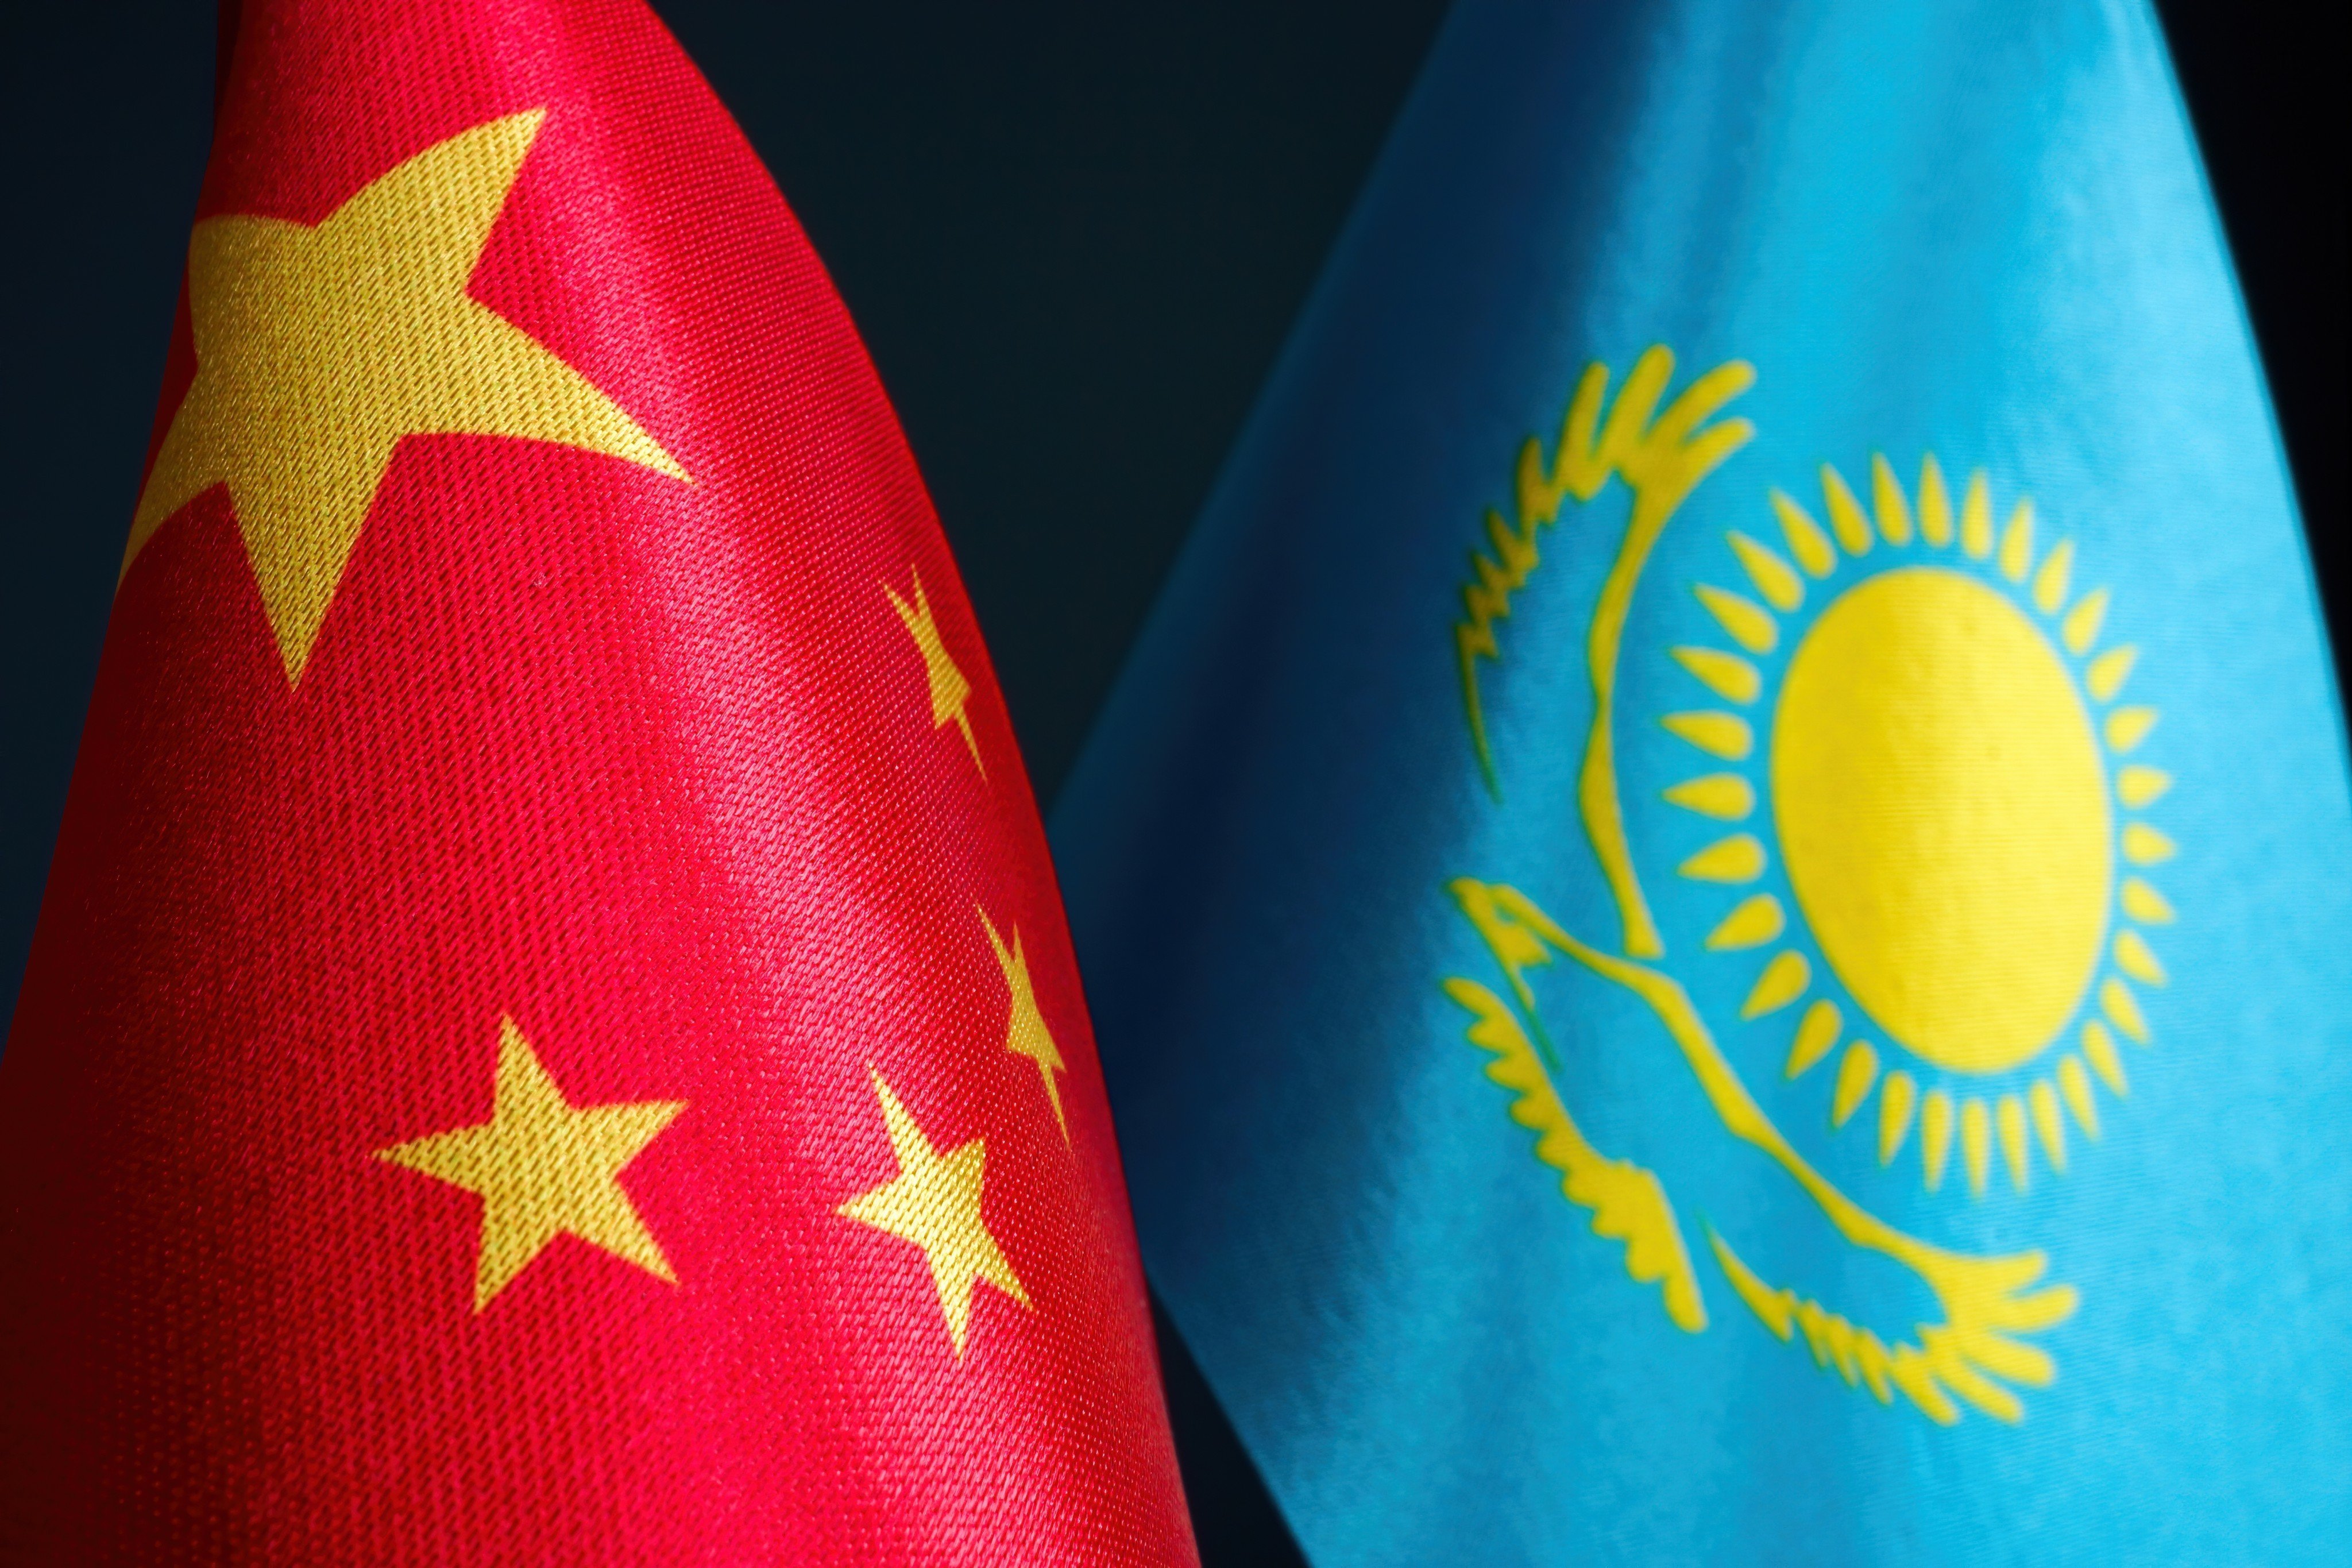 China and Kazakhstan share citizens’ entry and exit records, and whether a person had terminated their citizenship in one country when they became a citizen of another, according to the draft of a new Kazakhstan agreement. Photo: Shutterstock Images